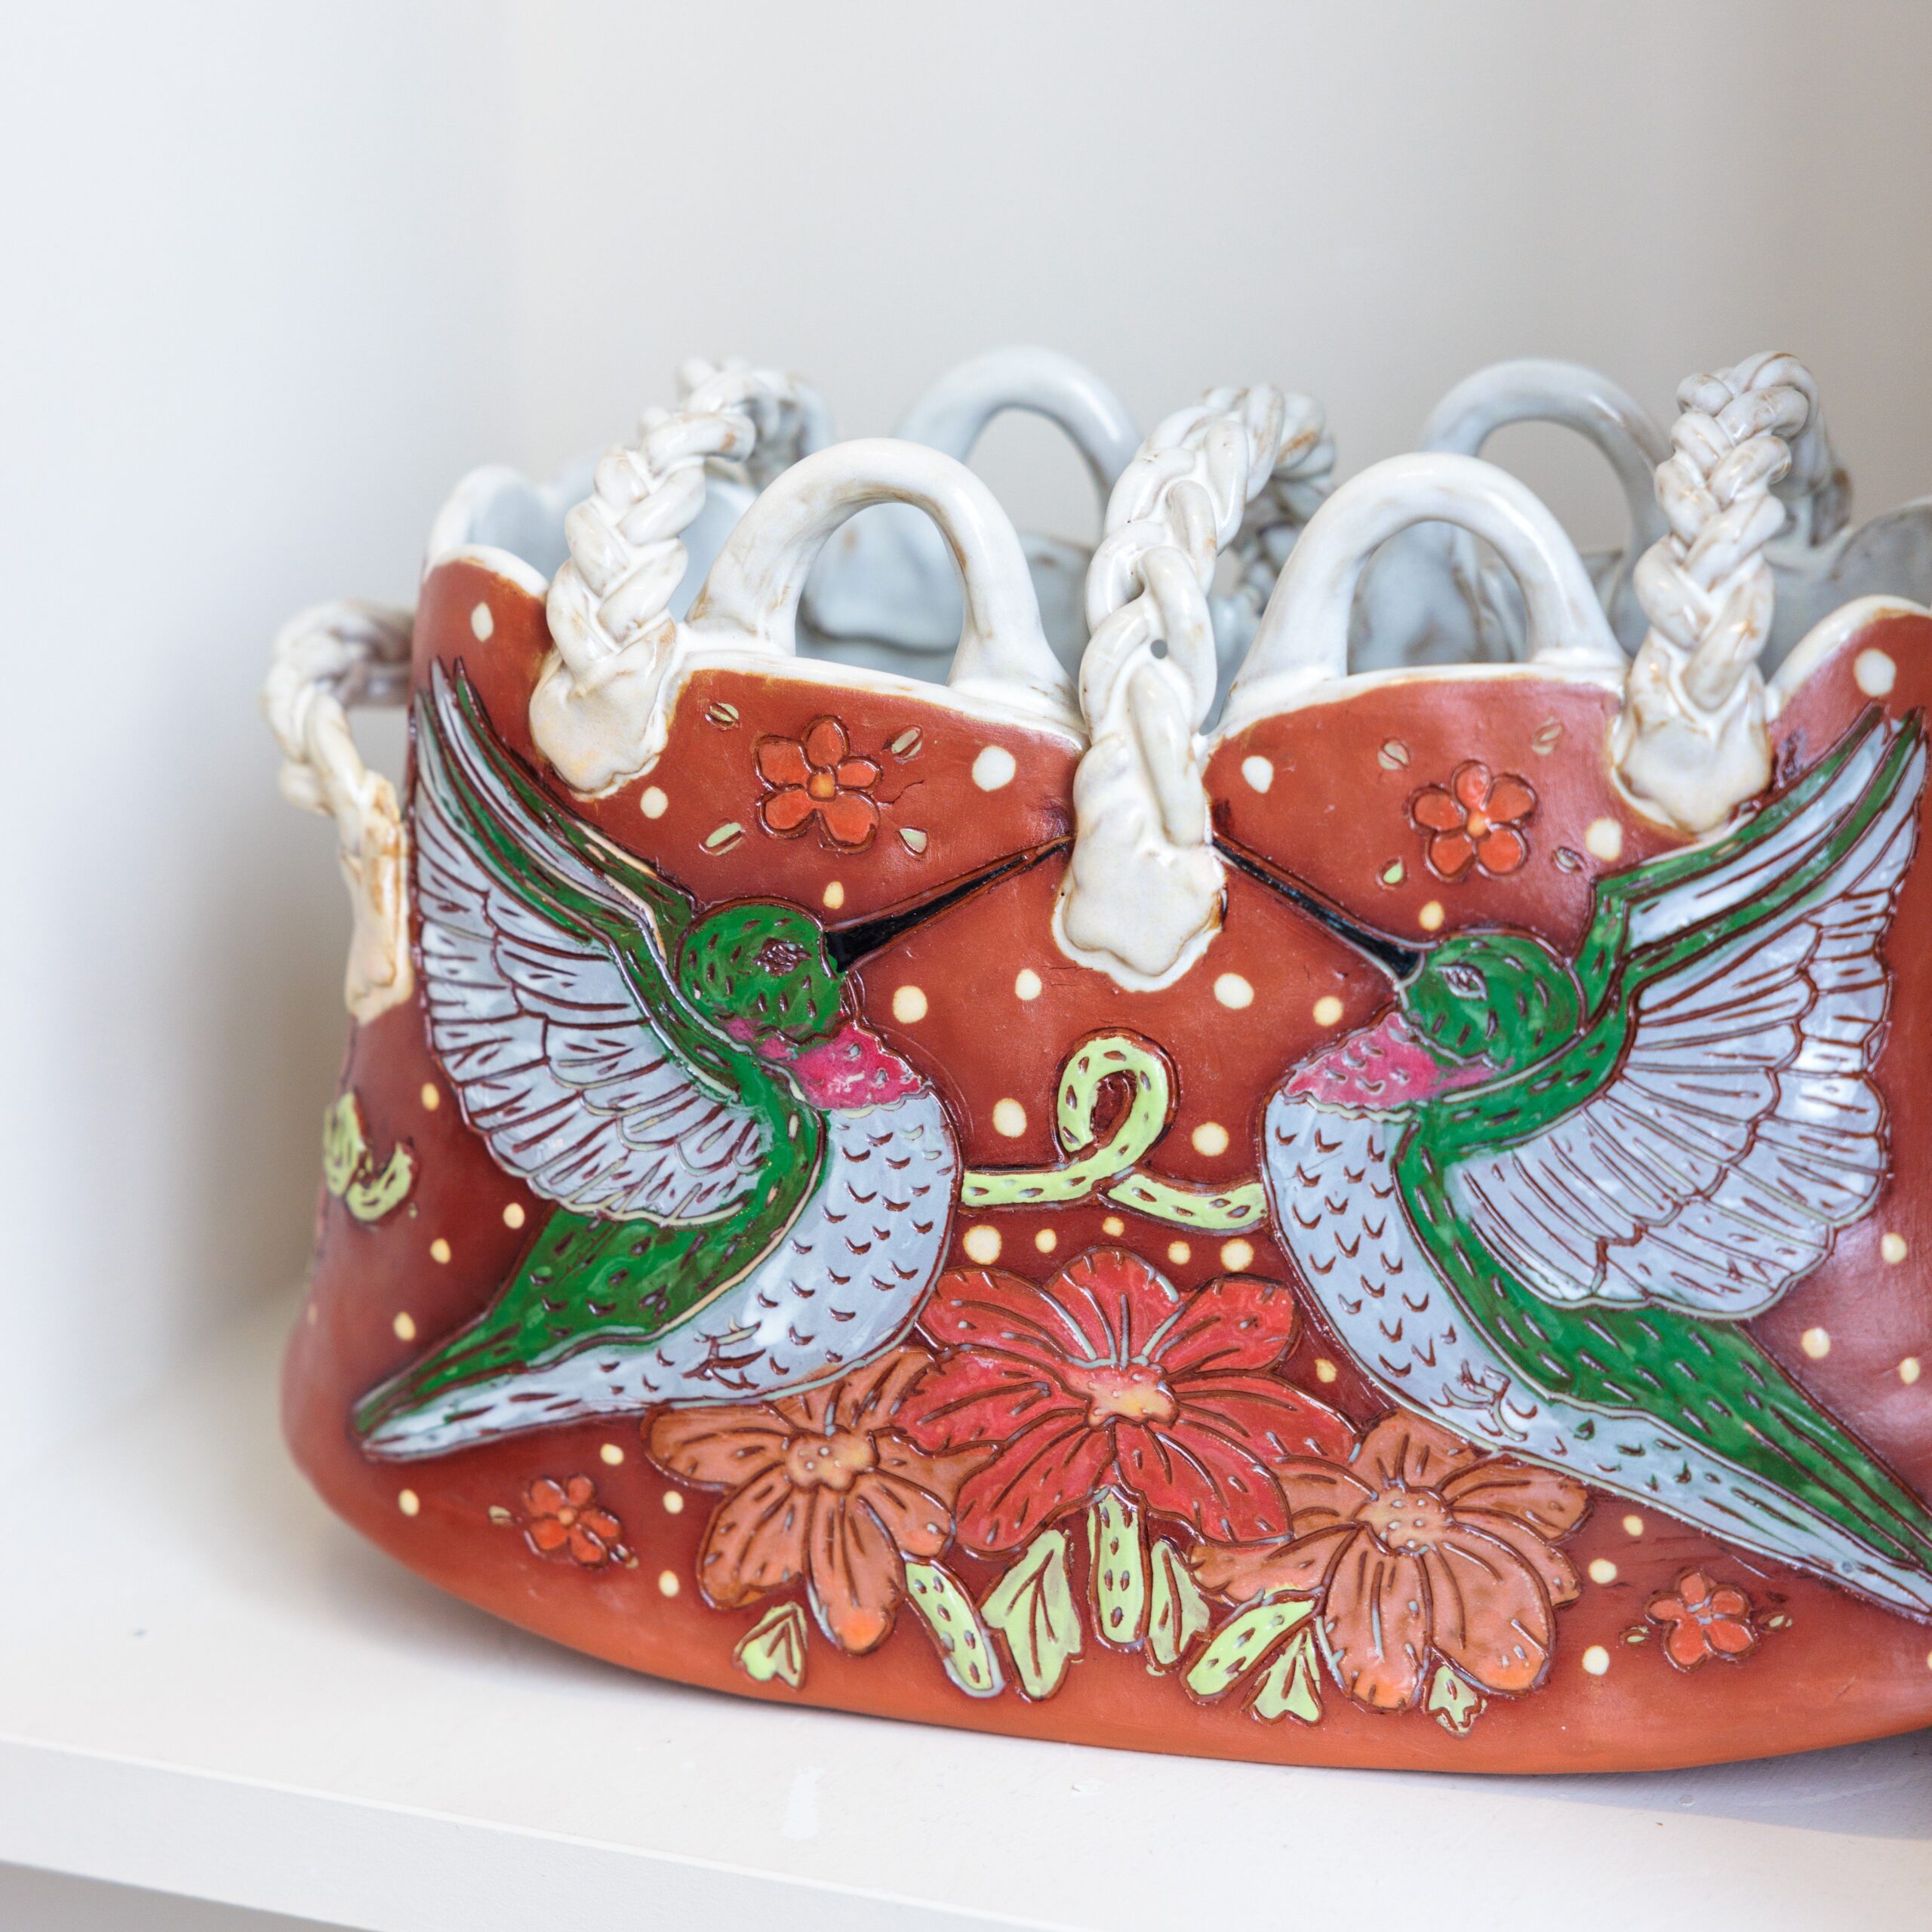 Zoe Pinnell: Hummingbird Basket Product Image 2 of 3